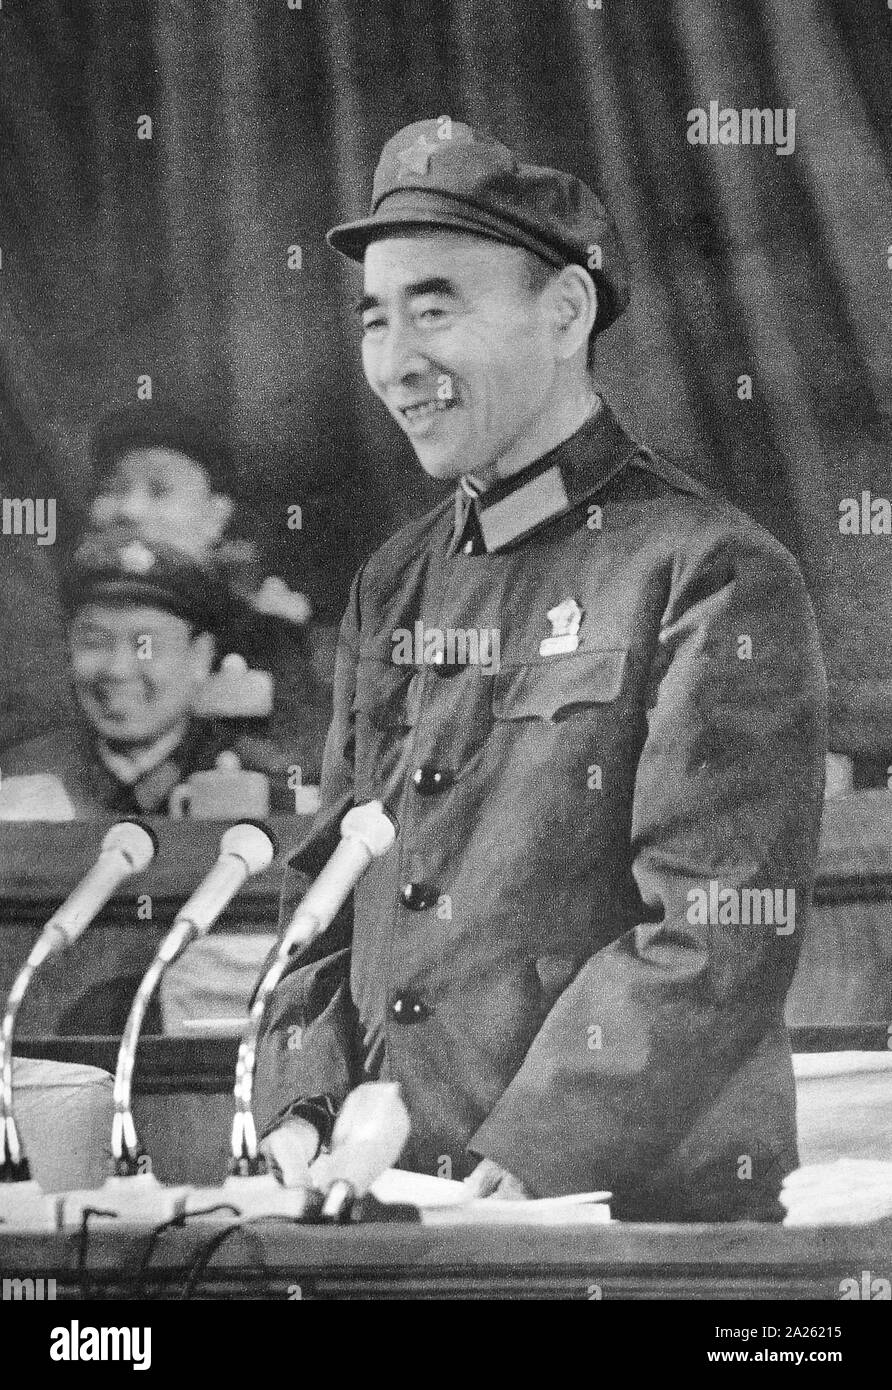 Lin Biao attending the standing committee of the Peoples Congress 1966. Lin Biao (1907 - 1971). Lin became instrumental in creating the foundations for Mao Zedong's cult of personality, and was rewarded in the Cultural Revolution by being named Mao's designated successor. Lin died on September 13, 1971. Stock Photo